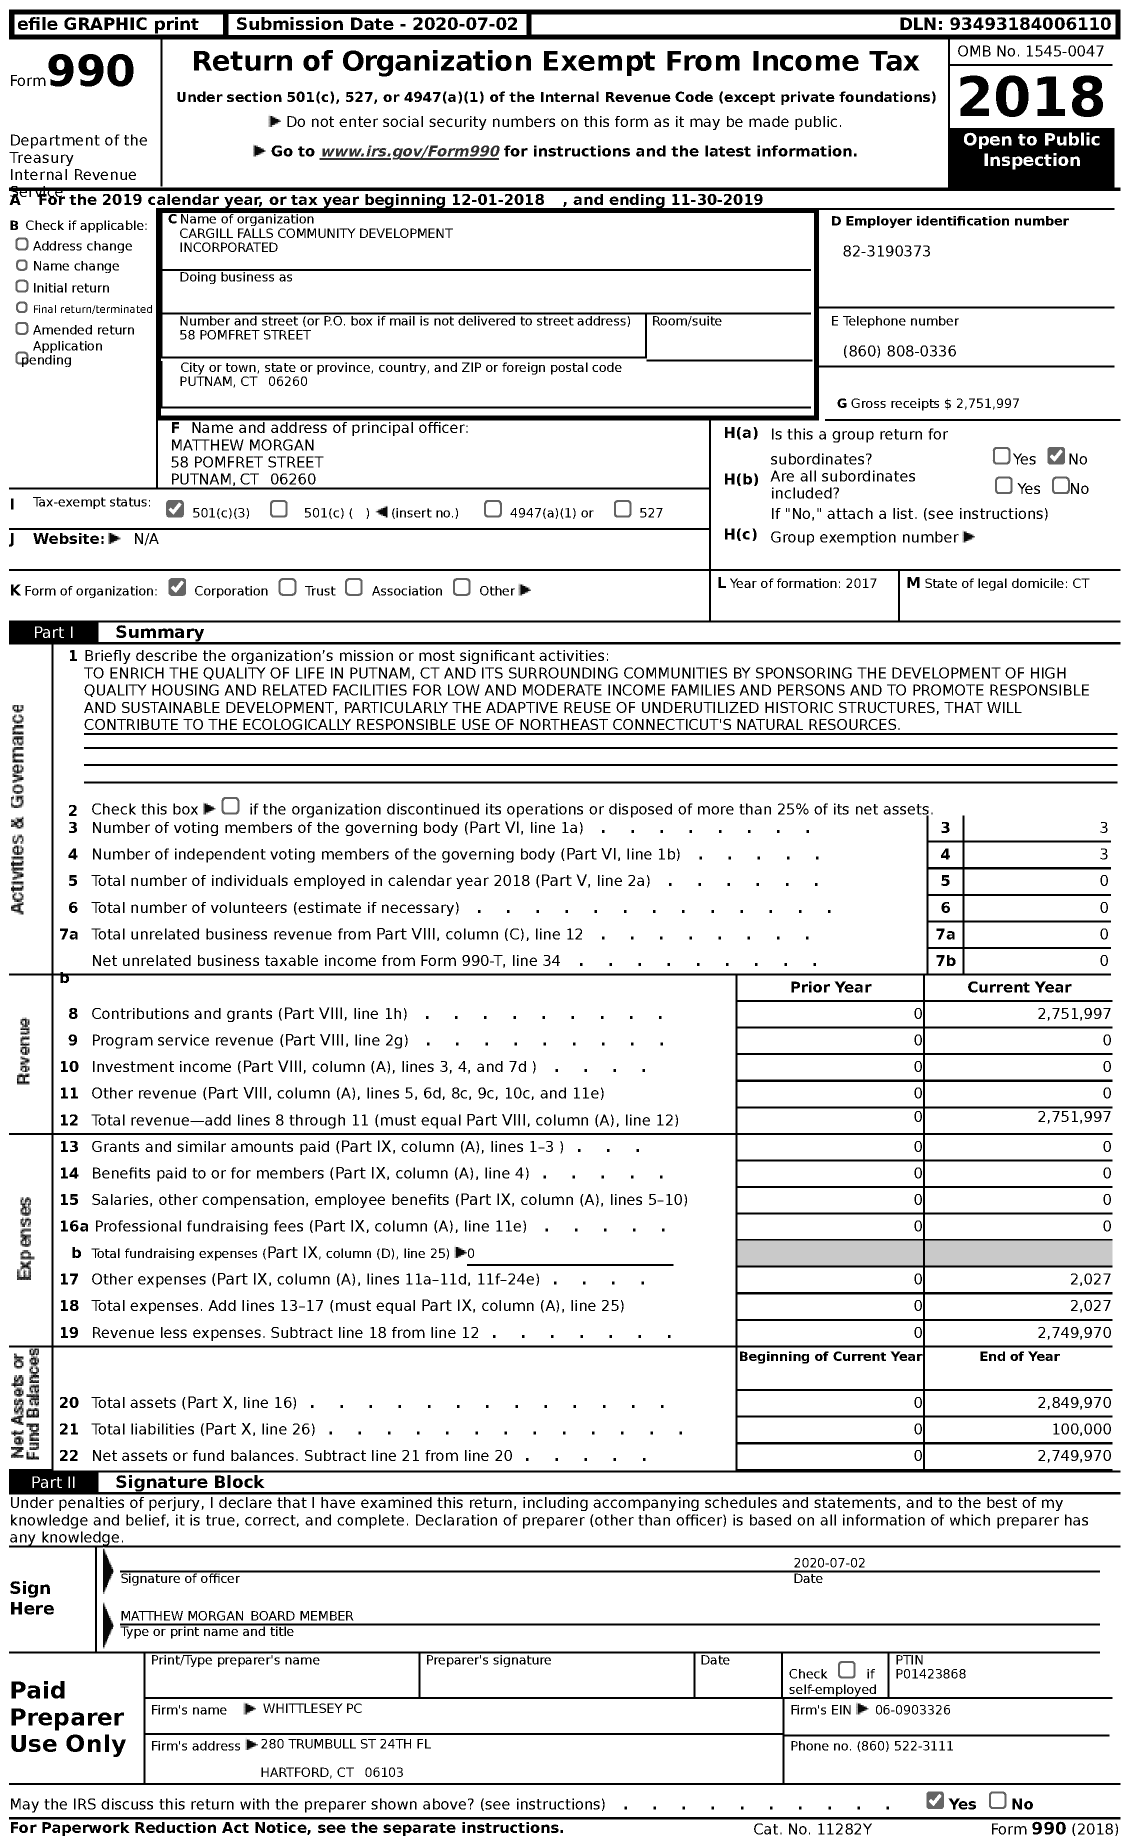 Image of first page of 2018 Form 990 for Cargill Falls Community Development Incorporated